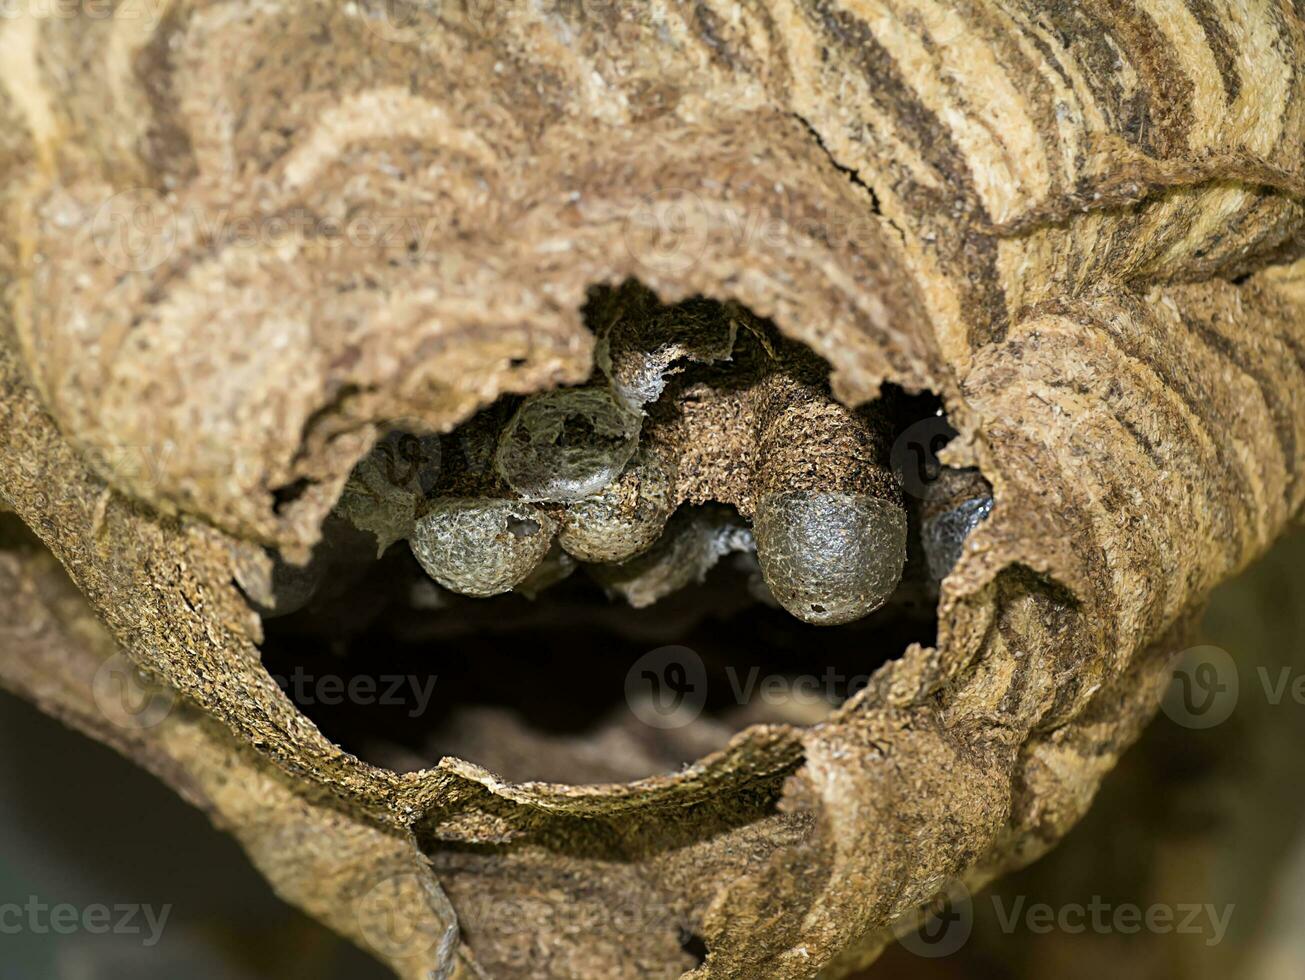 Paper wasp nest with eggs inside photo